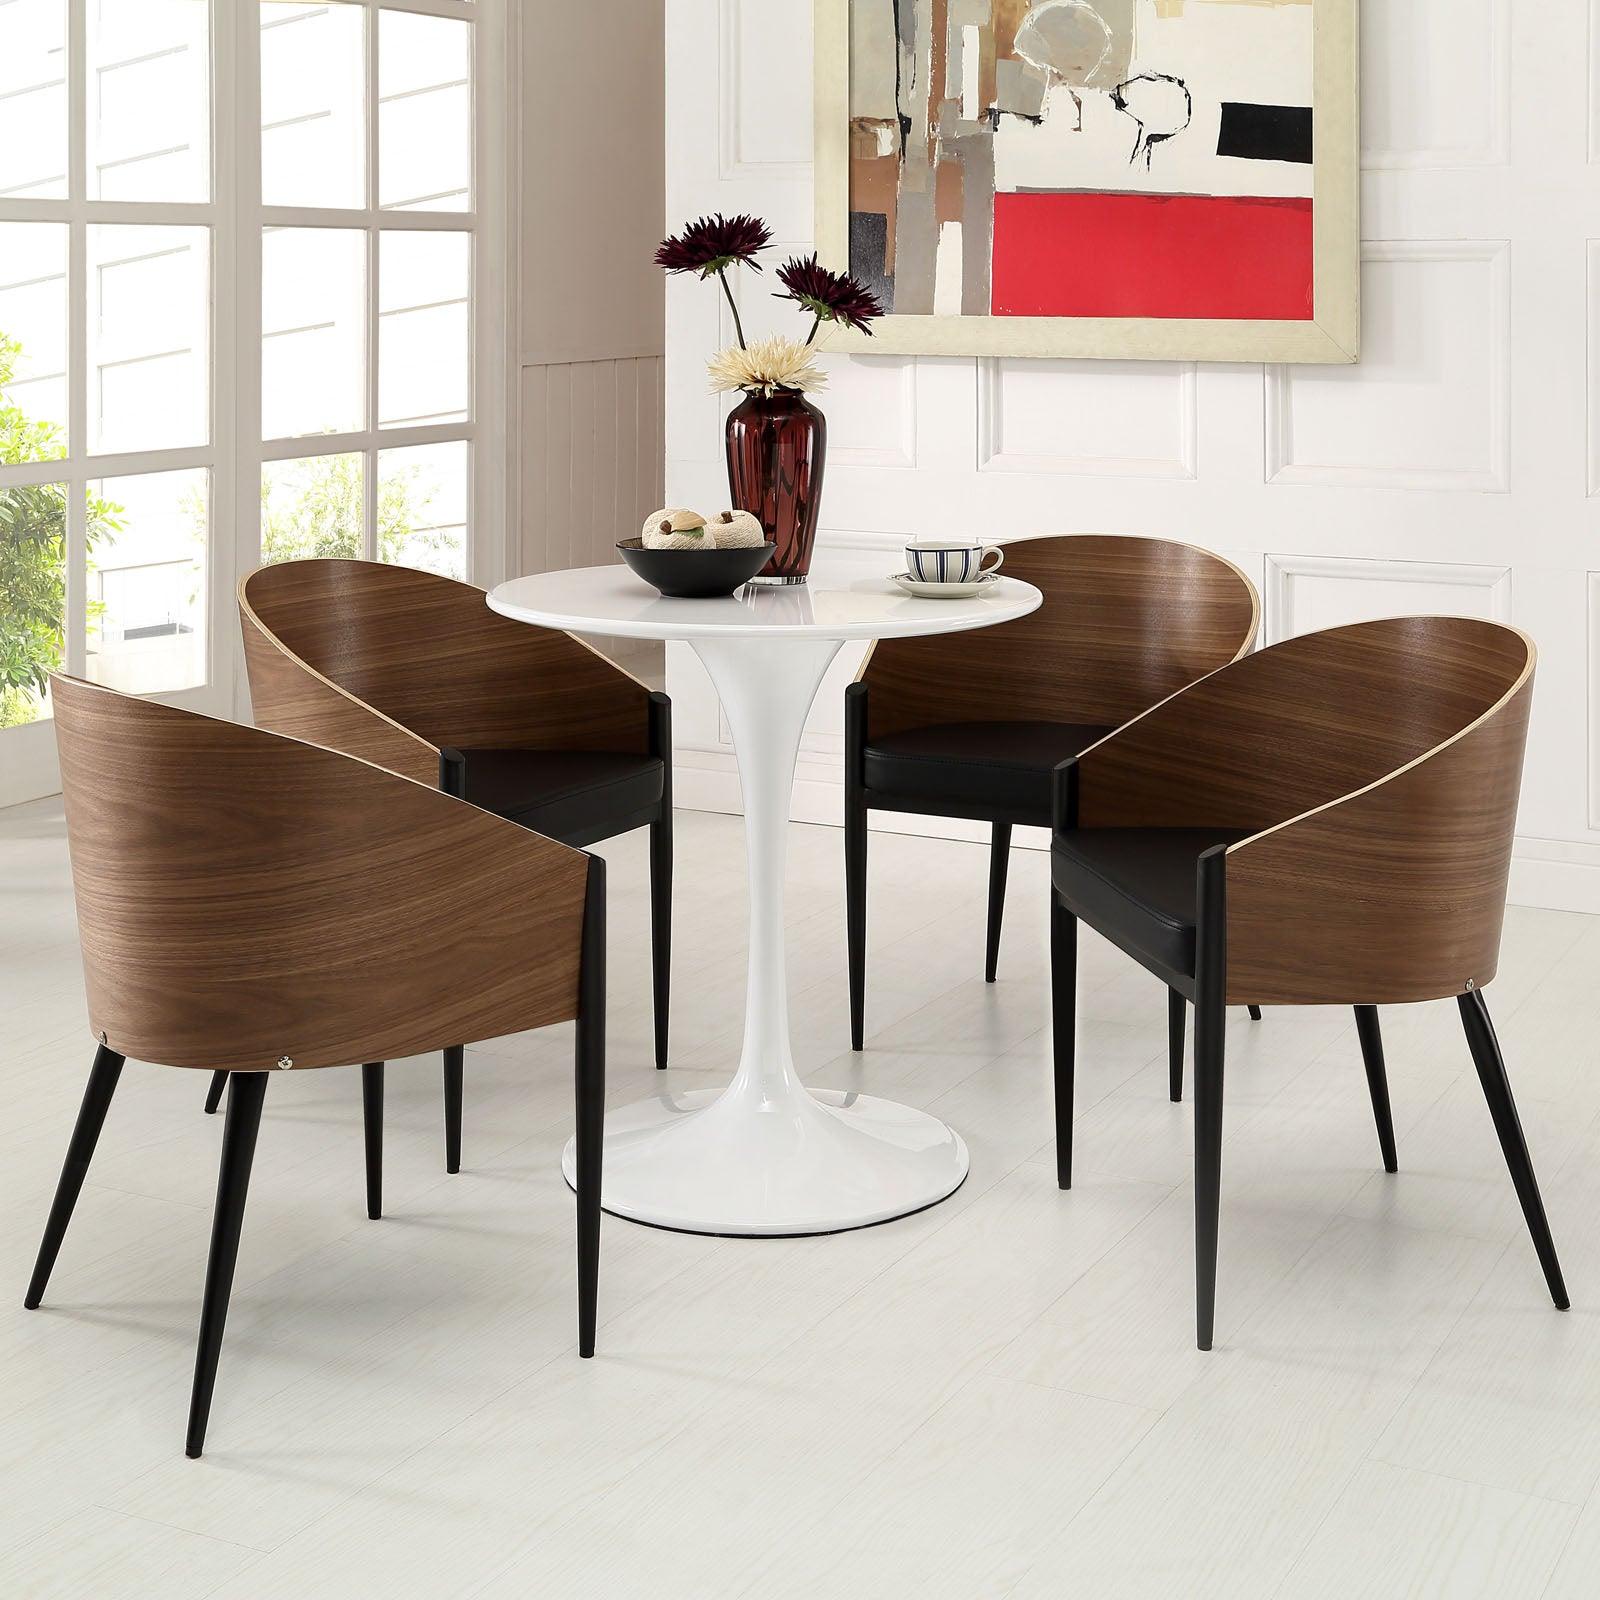 Modway Cooper Dining Chairs Set of 4 FredCo